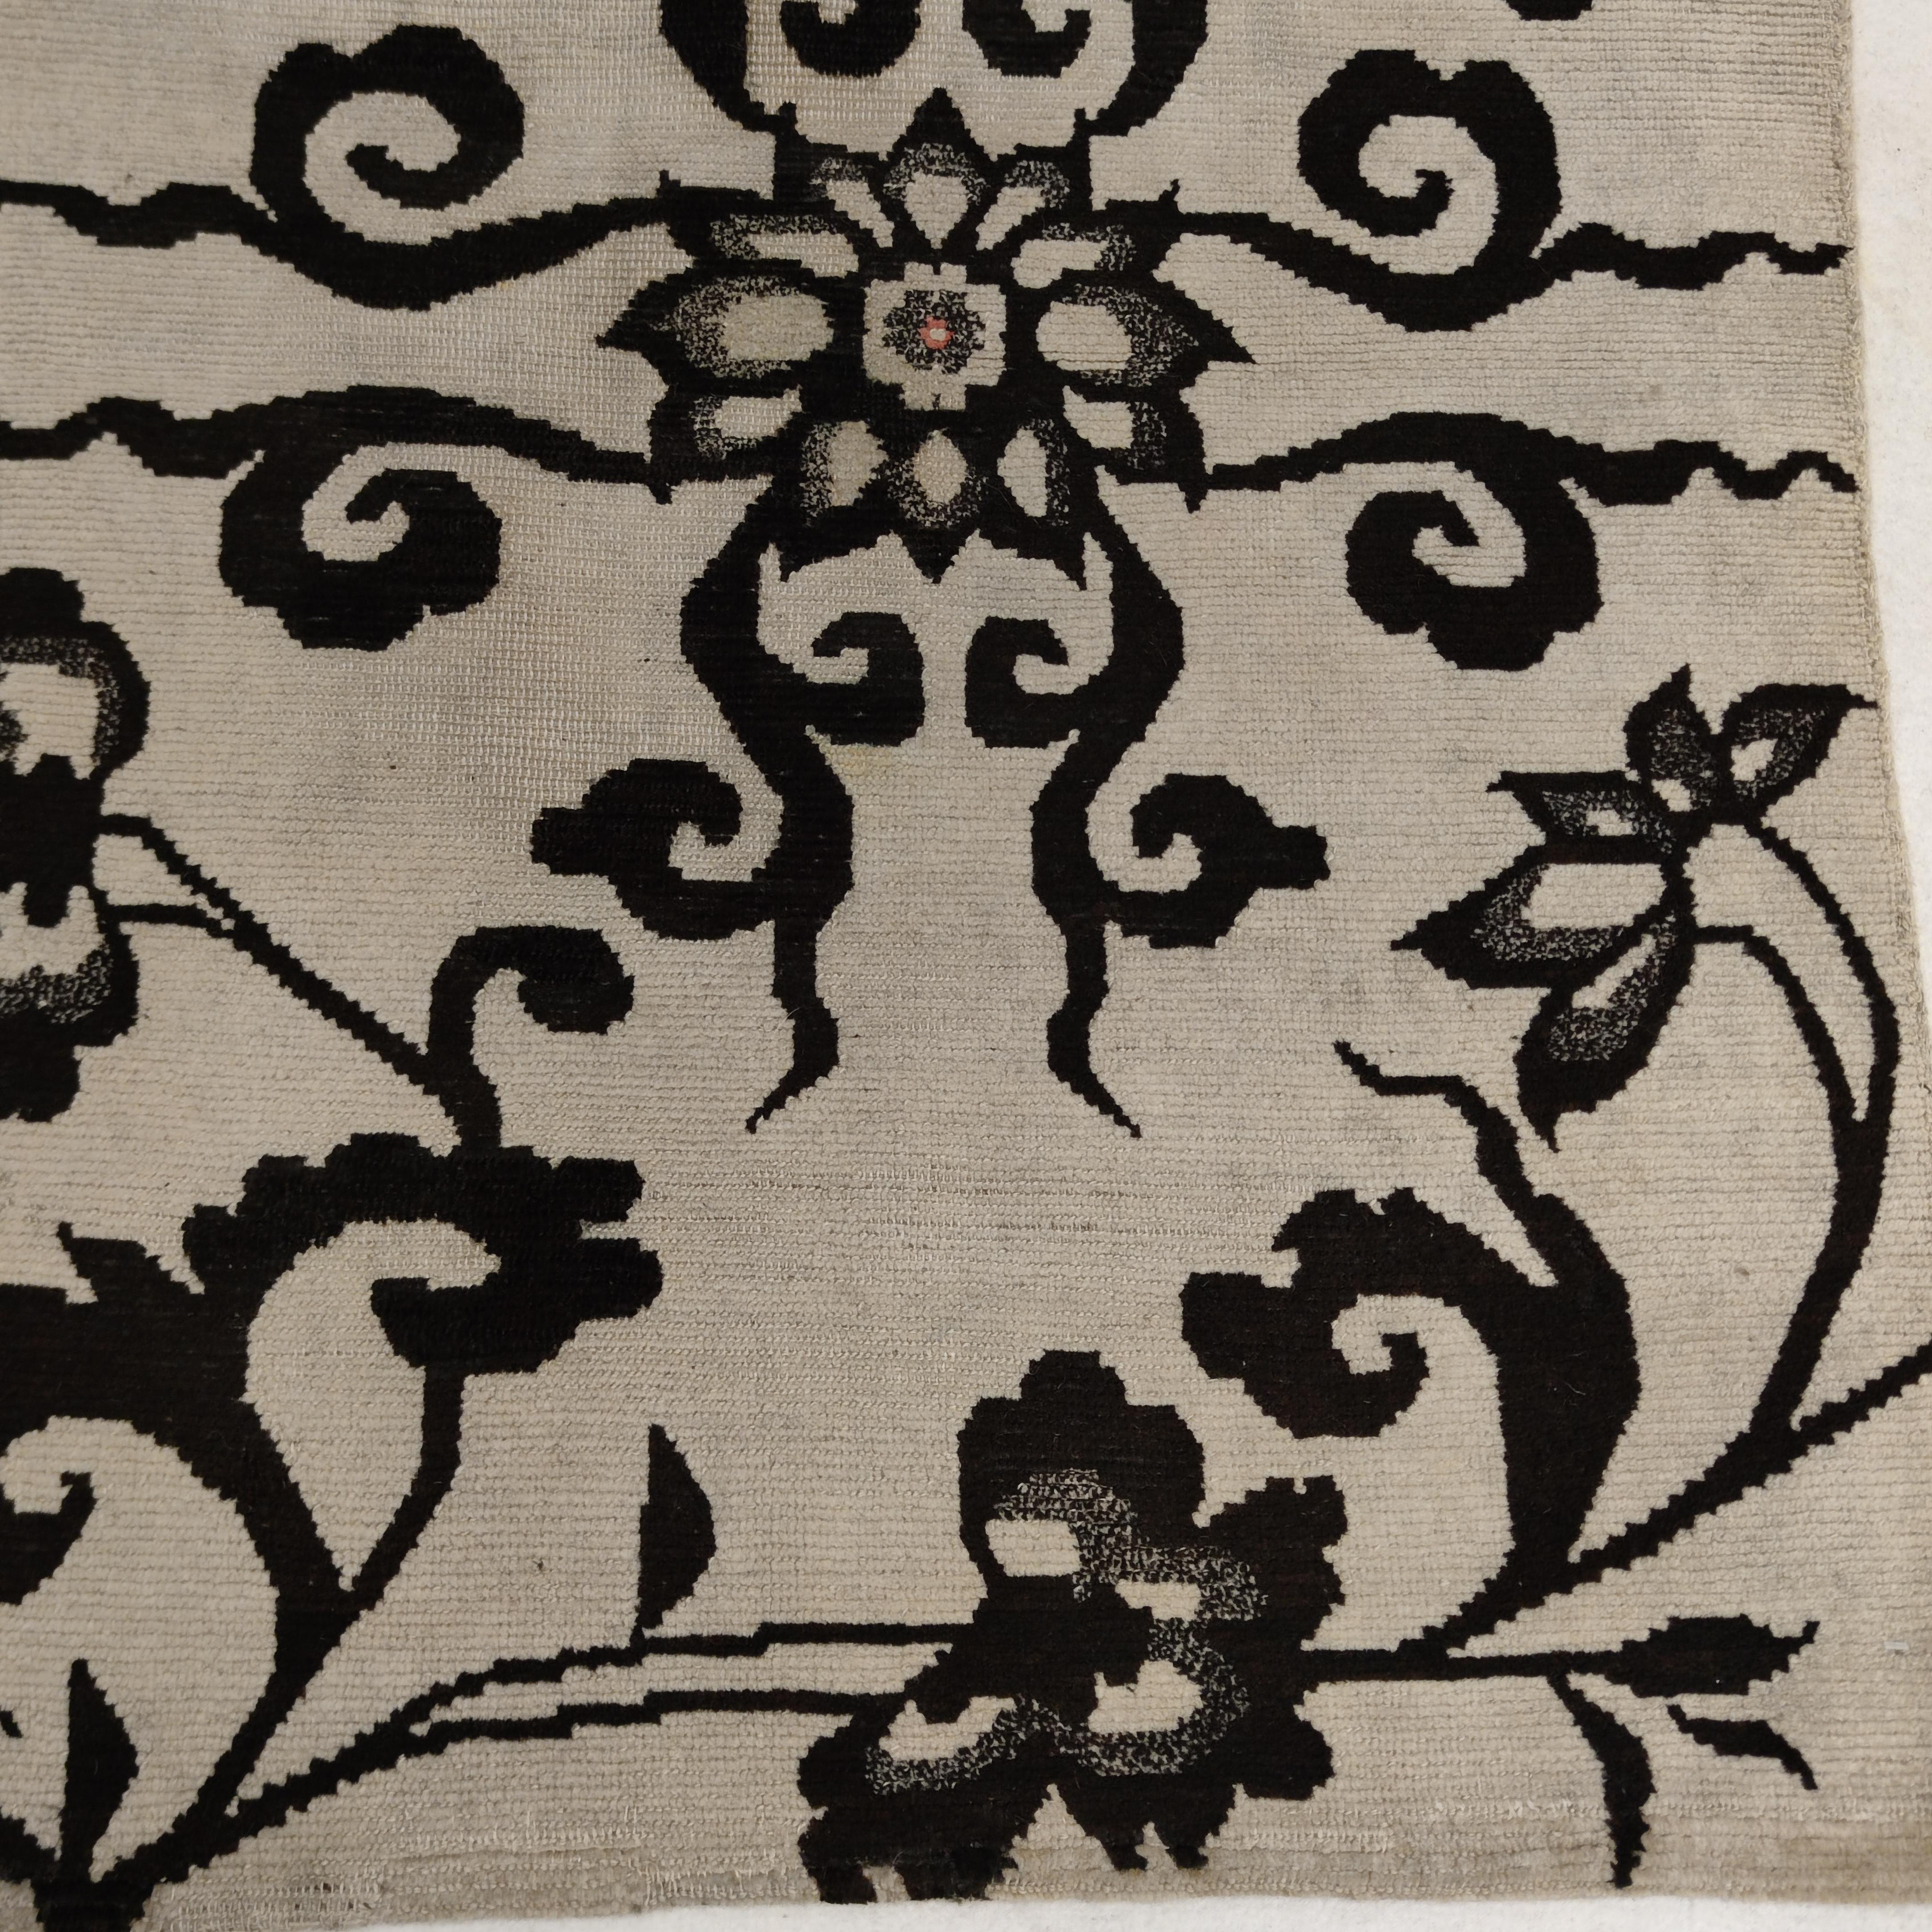 Late 19th Century Antique White Ground Tibetan Khaden Rug with Black Lotus Flowers and Tendrils